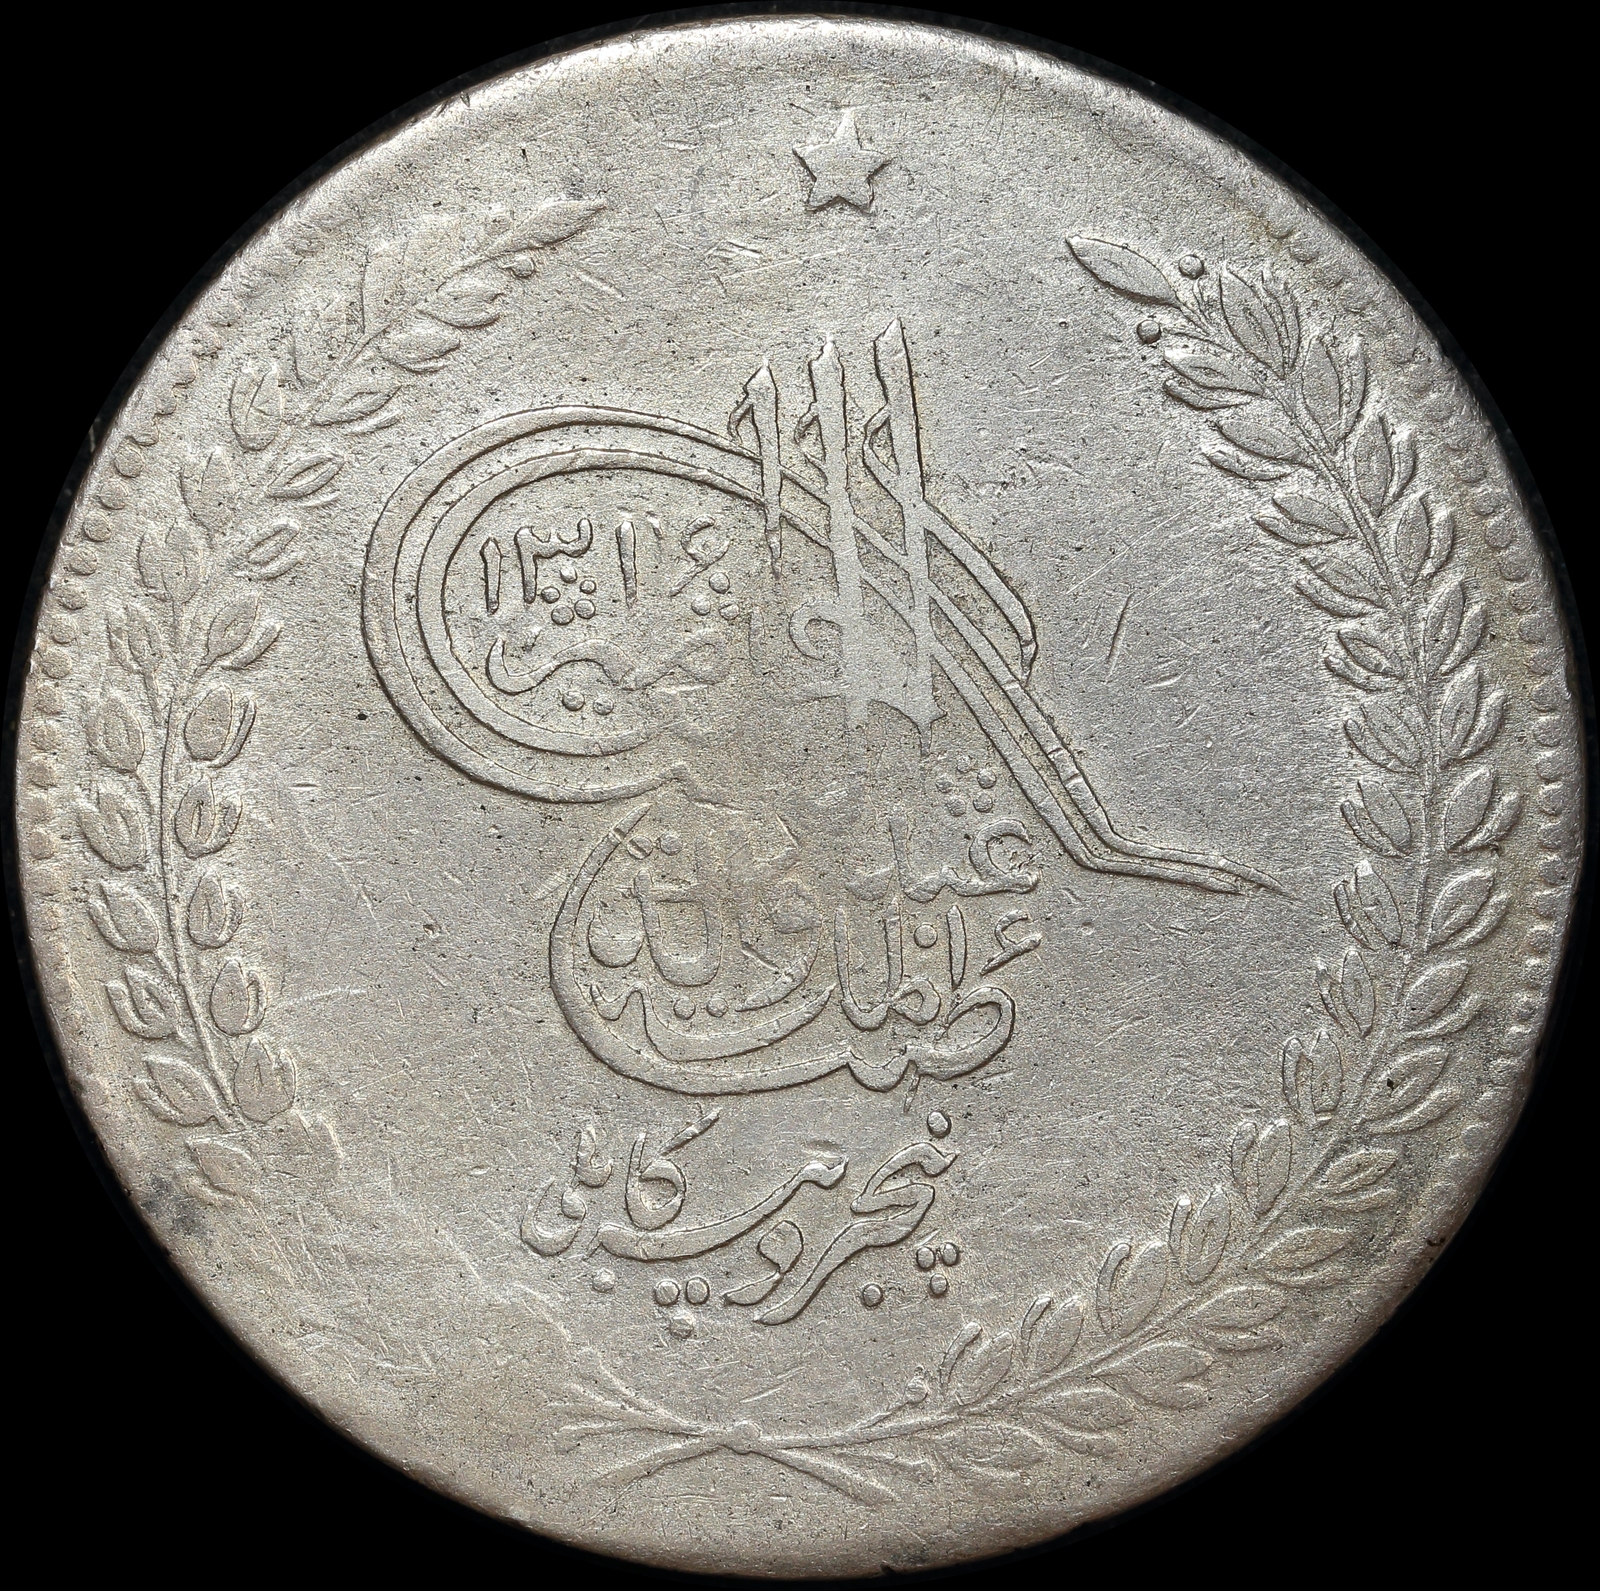 Afghanistan 1898 Kabul Silver 5 Rupees KM#826 Very Fine product image